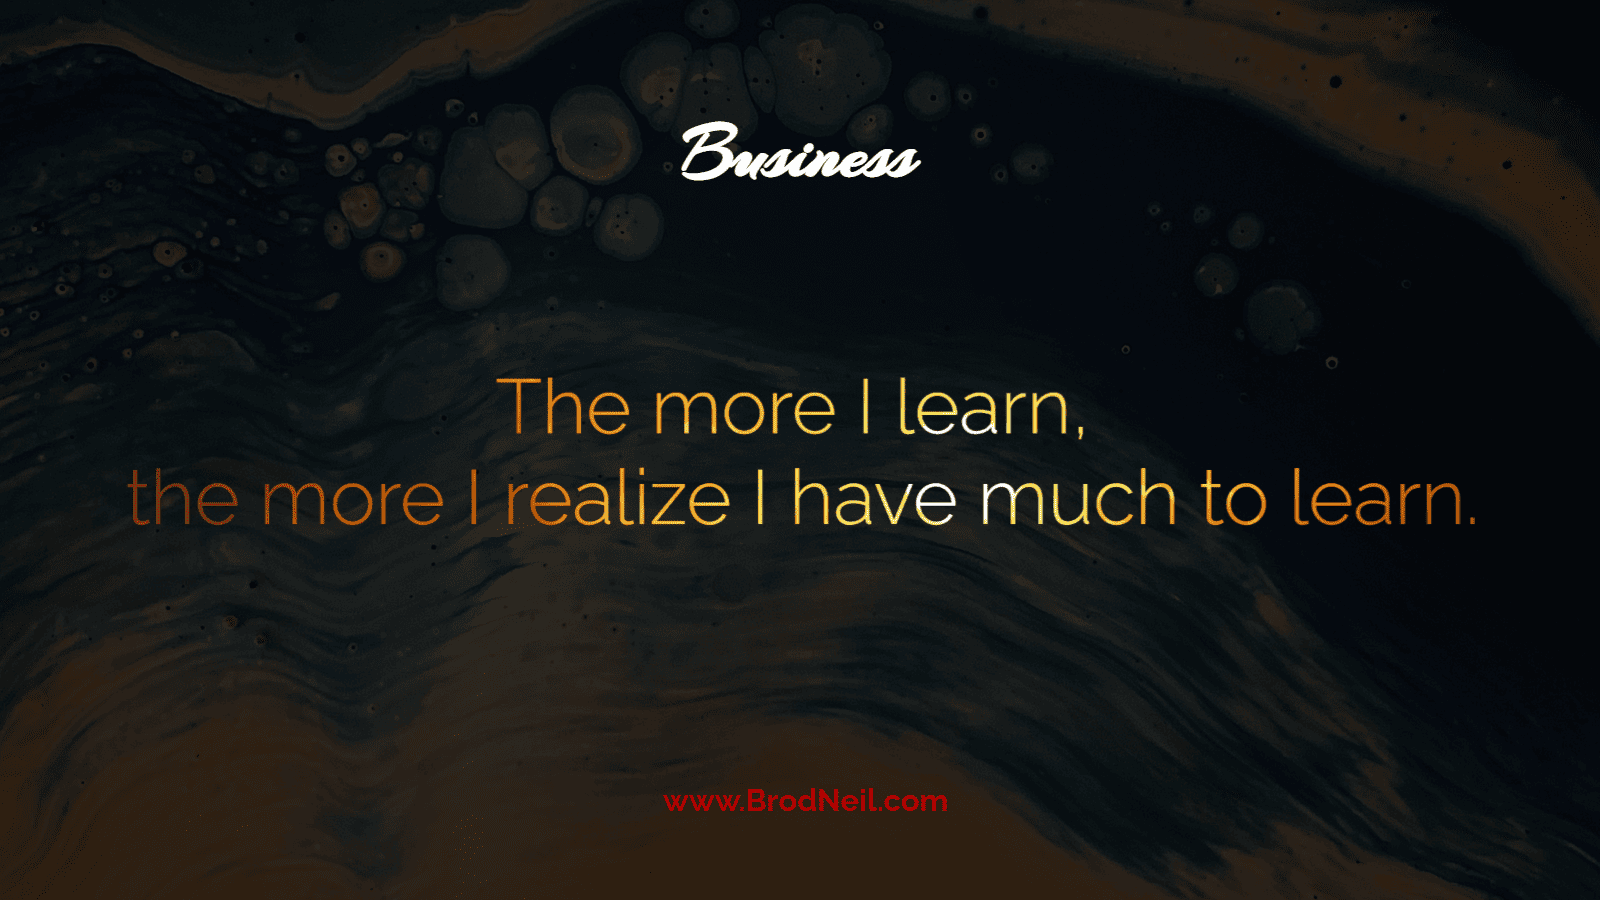 The more I learn, the more I realize I have much to learn